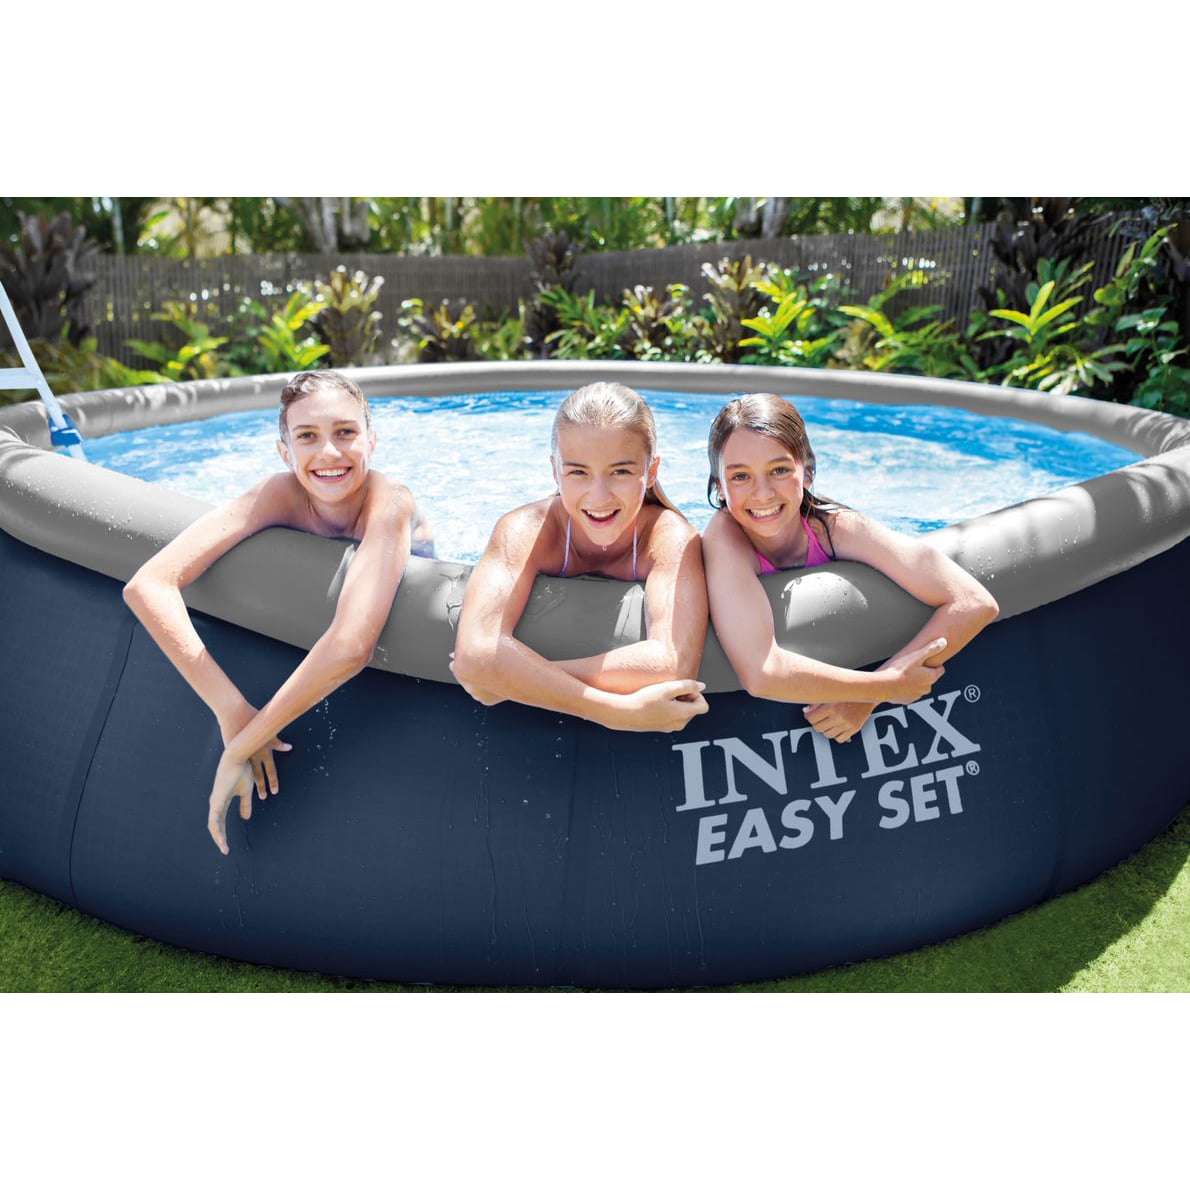 Intex Easy Set 15ft x 42in Inflatable Outdoor Above Ground Swimming Pool Bundle with Filter Pump & Pool Care 36150 3-Inch Chlorine Tablets 50 Pounds